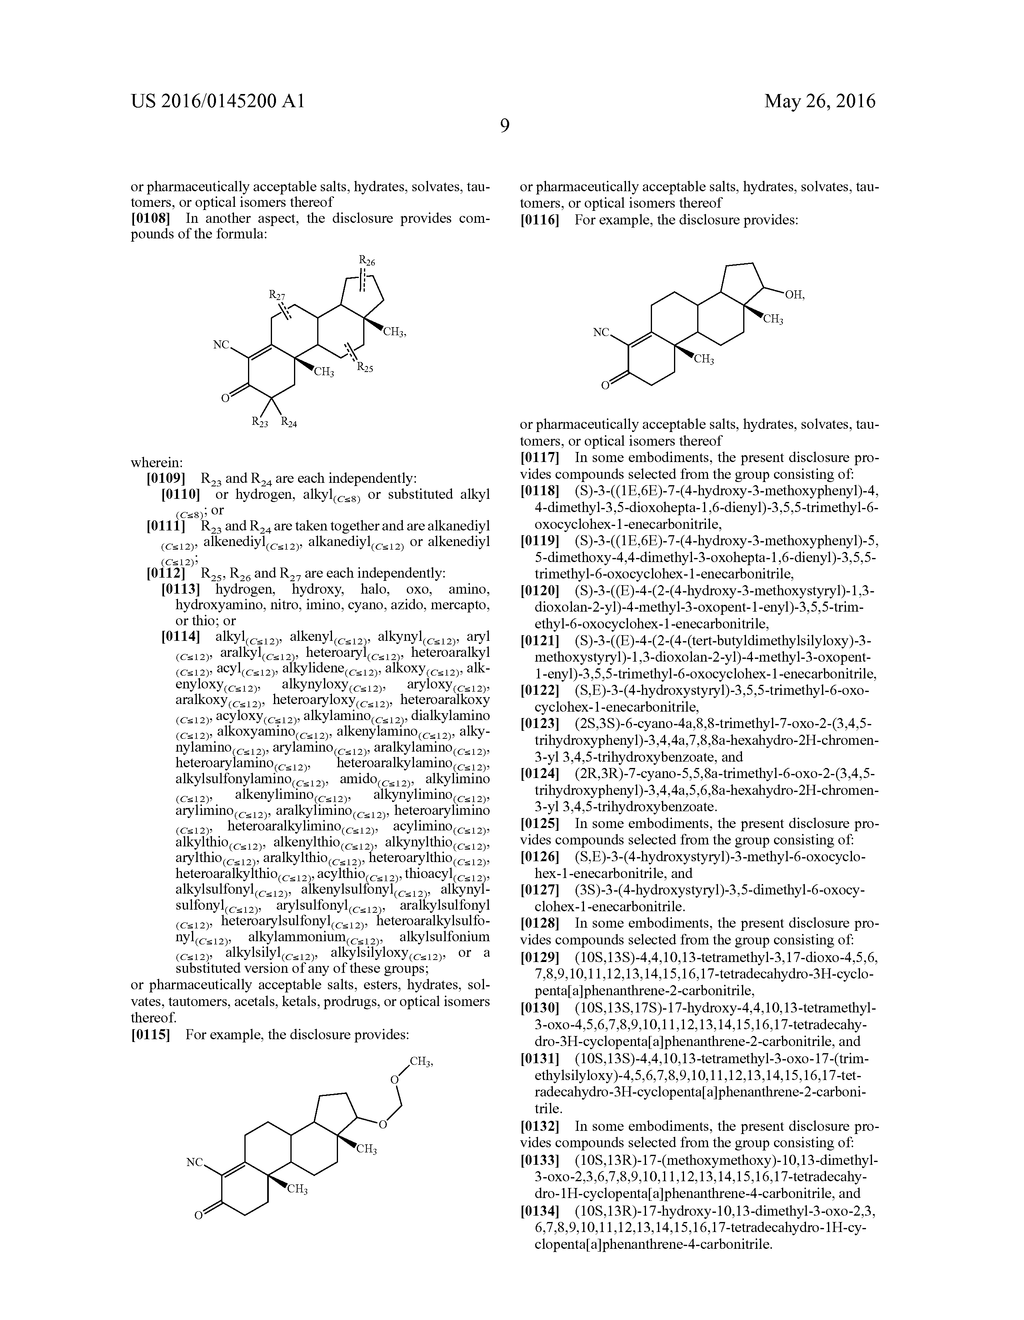 NATURAL PRODUCT ANALOGS INCLUDING AN ANTI-INFLAMMATORY CYANOENONE     PHARMACORE AND METHODS OF USE - diagram, schematic, and image 34